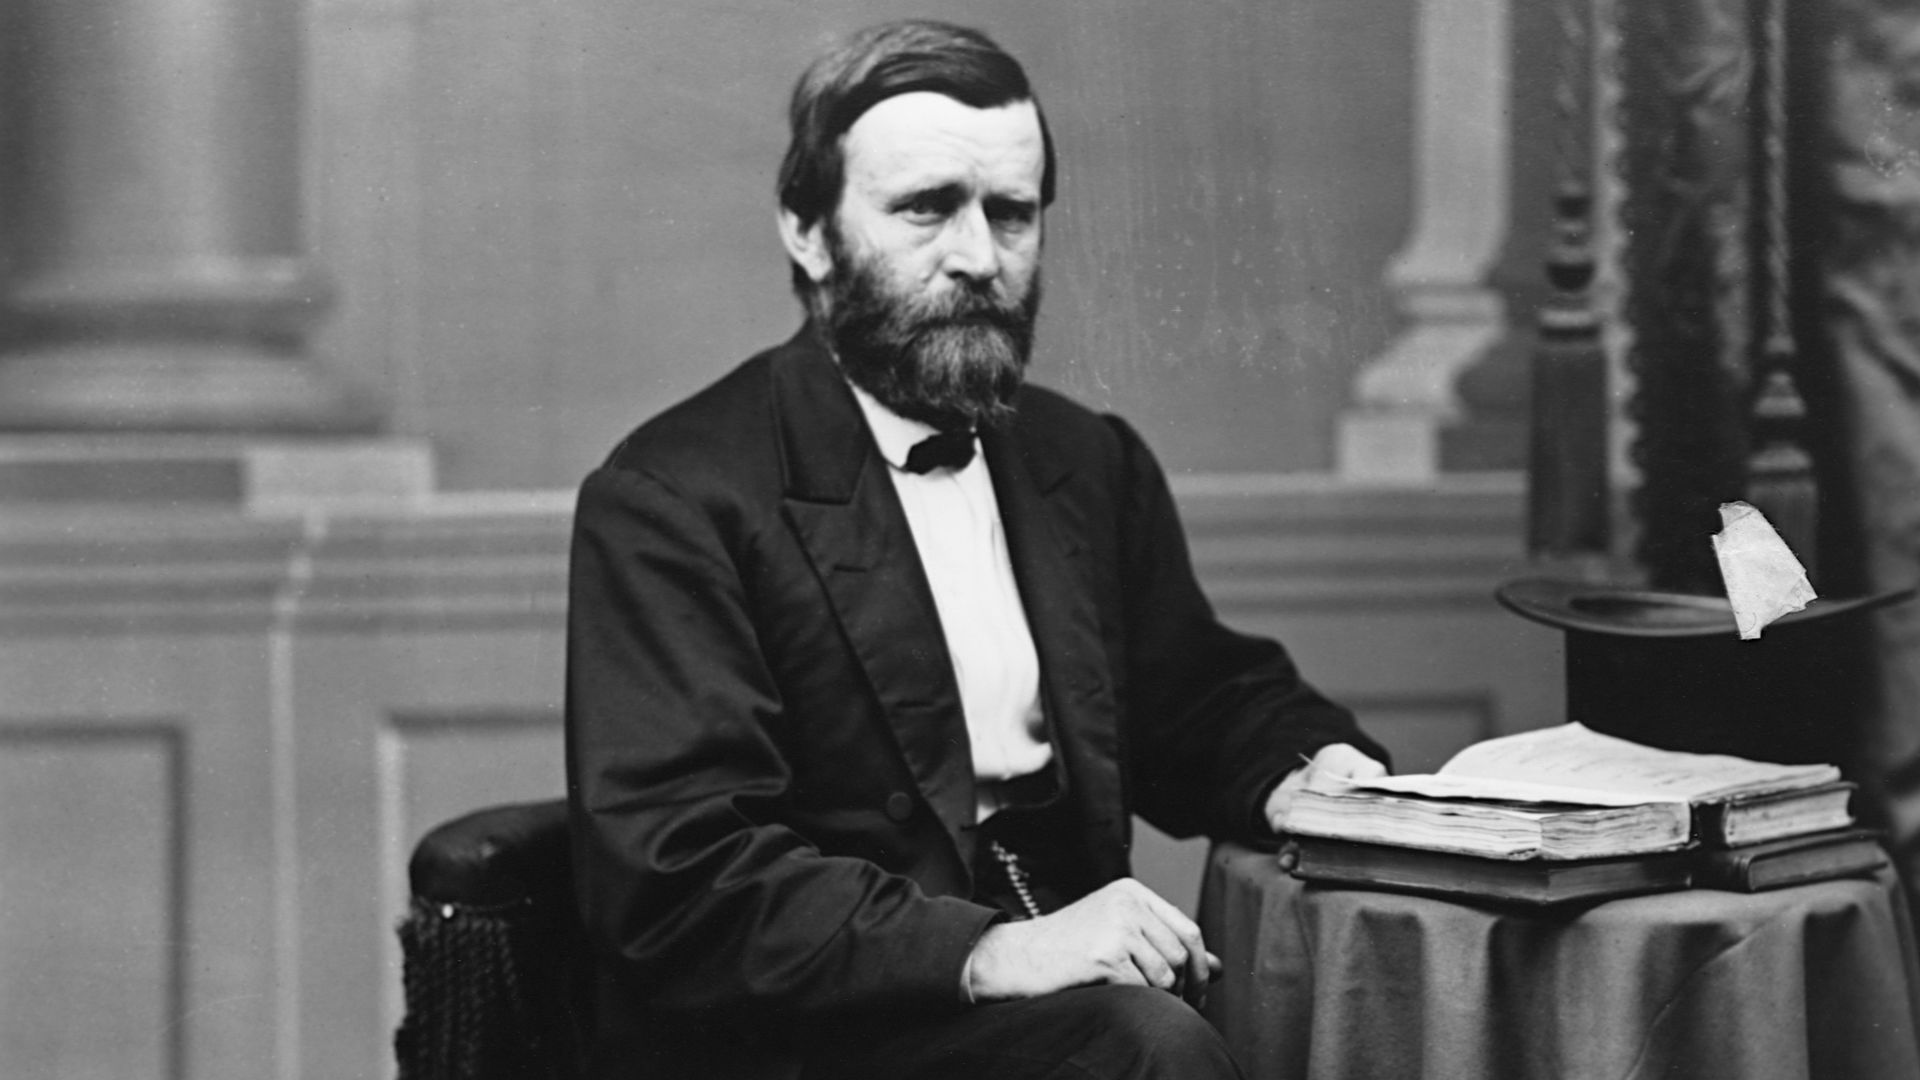 President Ulysses S. Grant: Known for Scandals, Overlooked for Achievements